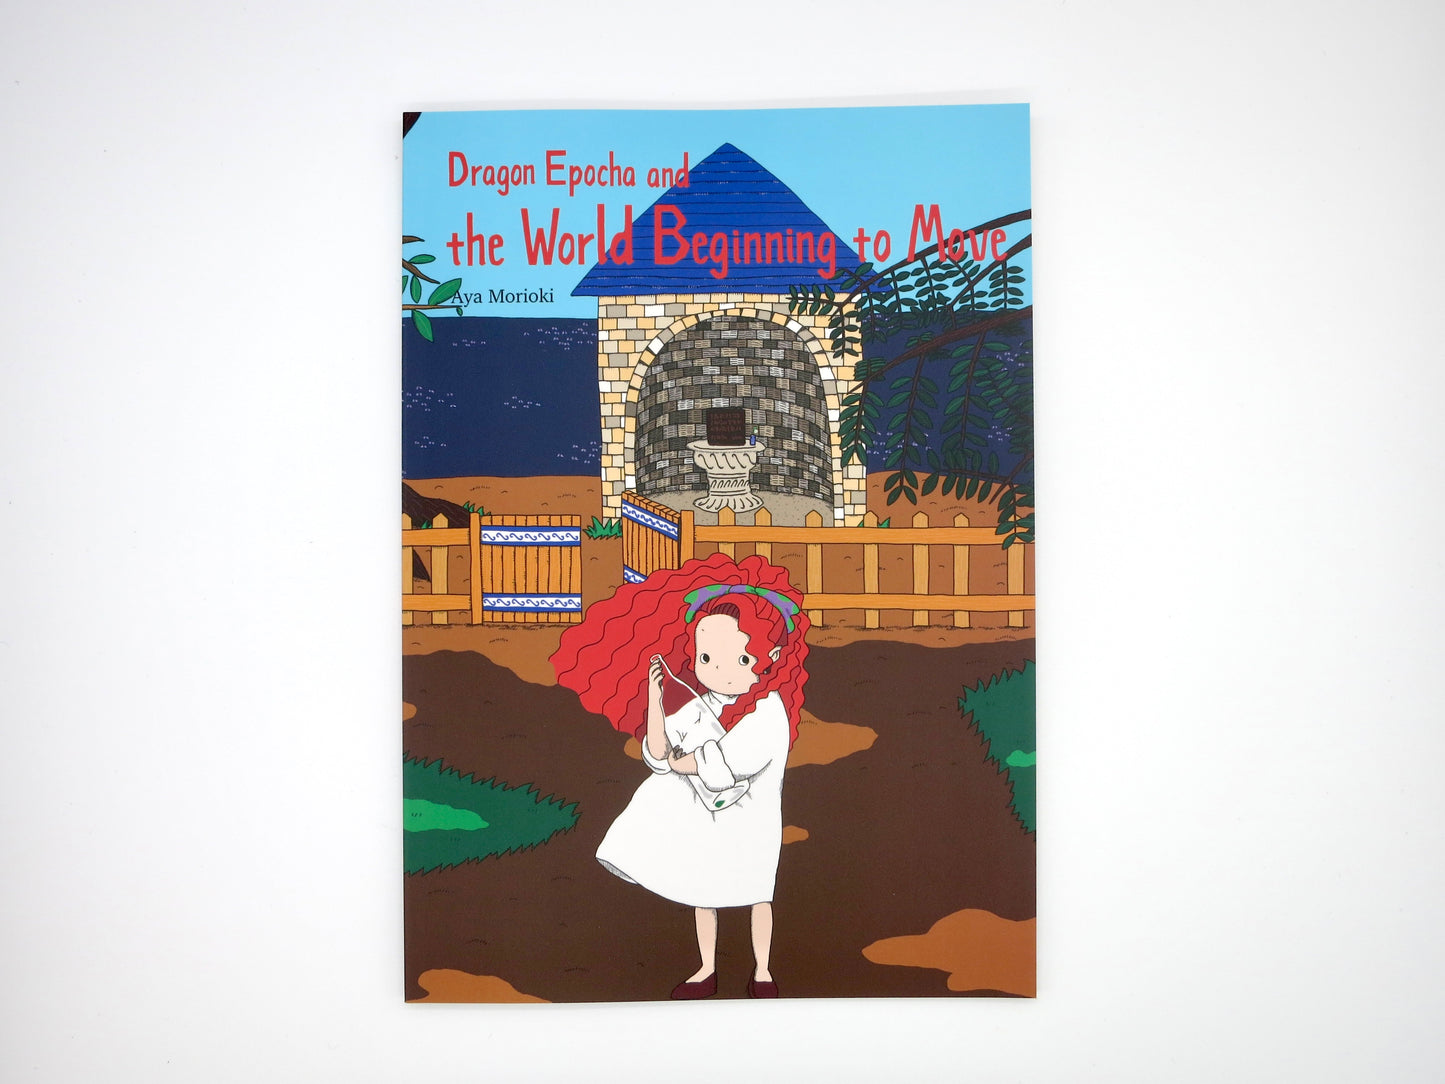 Picture book "Dragon Epocha and the World Beginning to Move" (Series Ep.2)